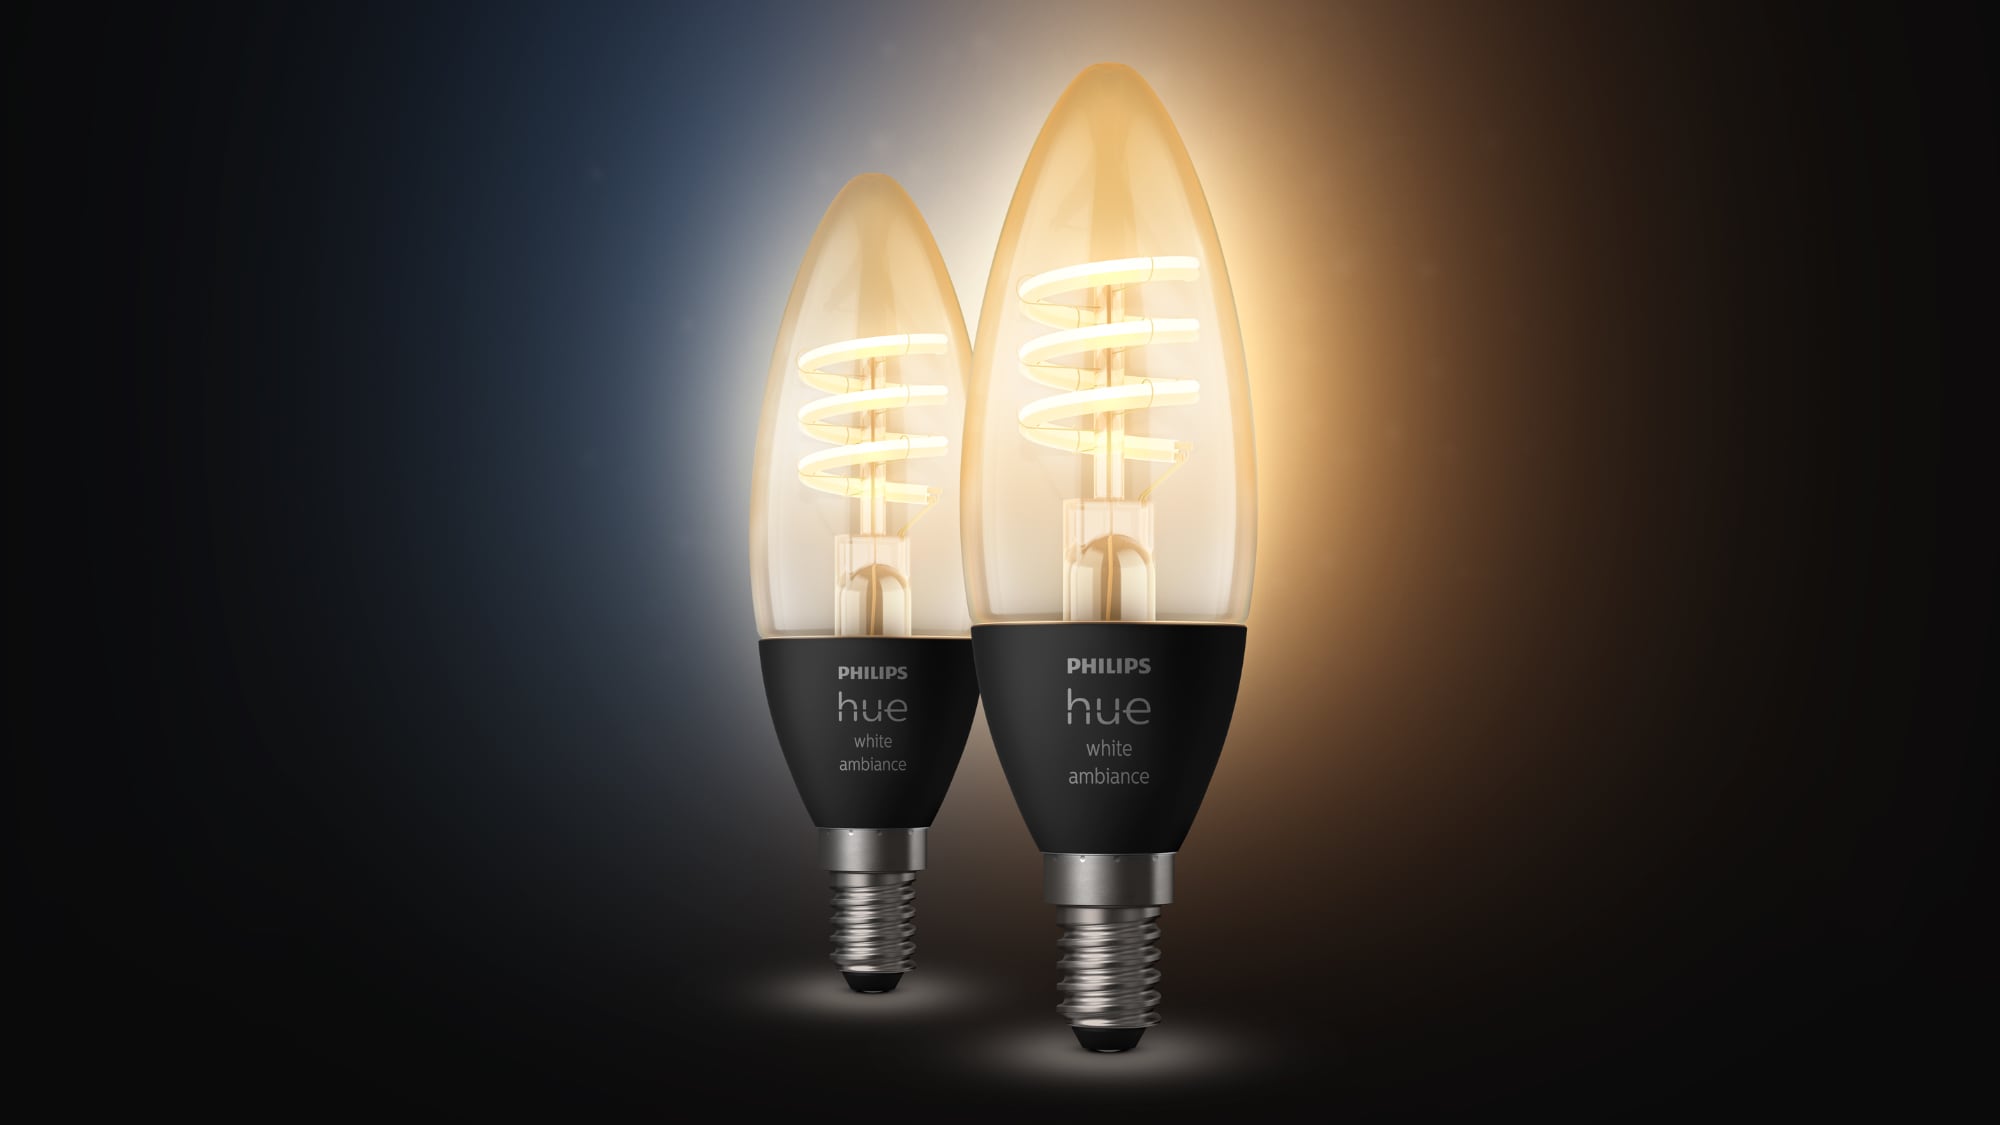 Hue e14 -- Does anyone know how I can get my hands on these in the US? : r/ Hue